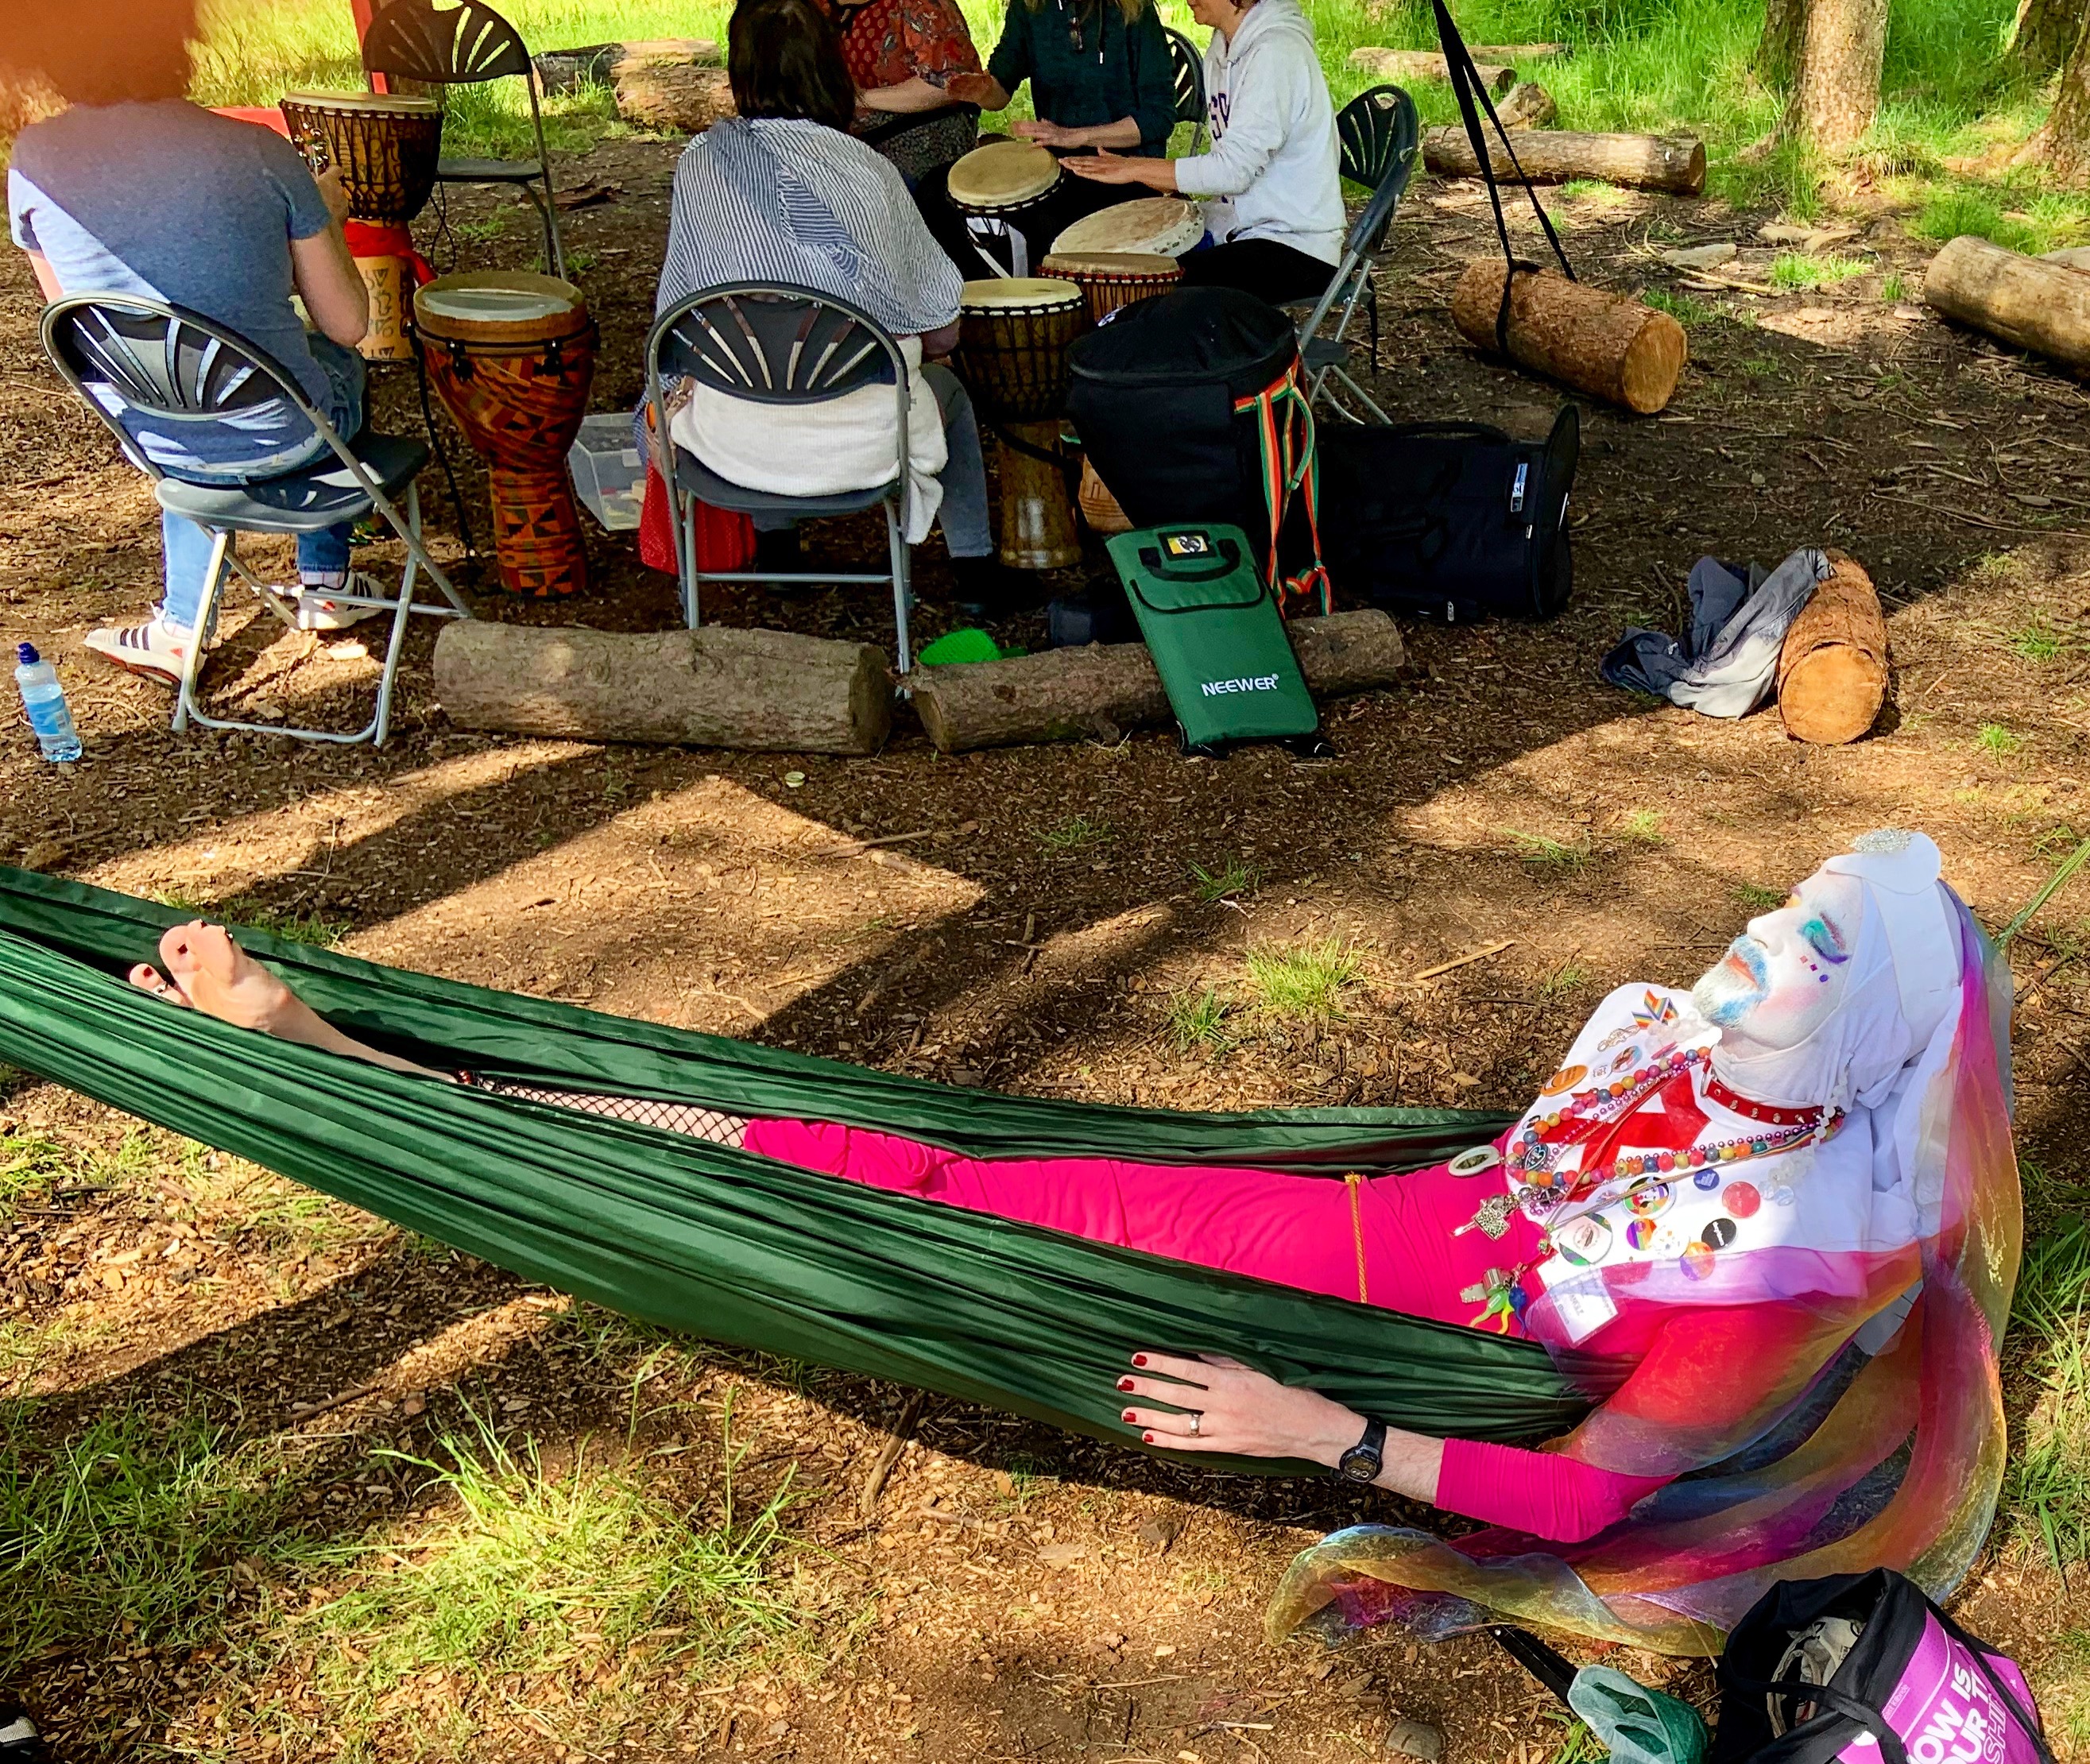 Novice Wye Dangle of the Glasgow Mission of the Order of Perpetual Indulgence relaxes in a hammock at the end of K-Pride 2019